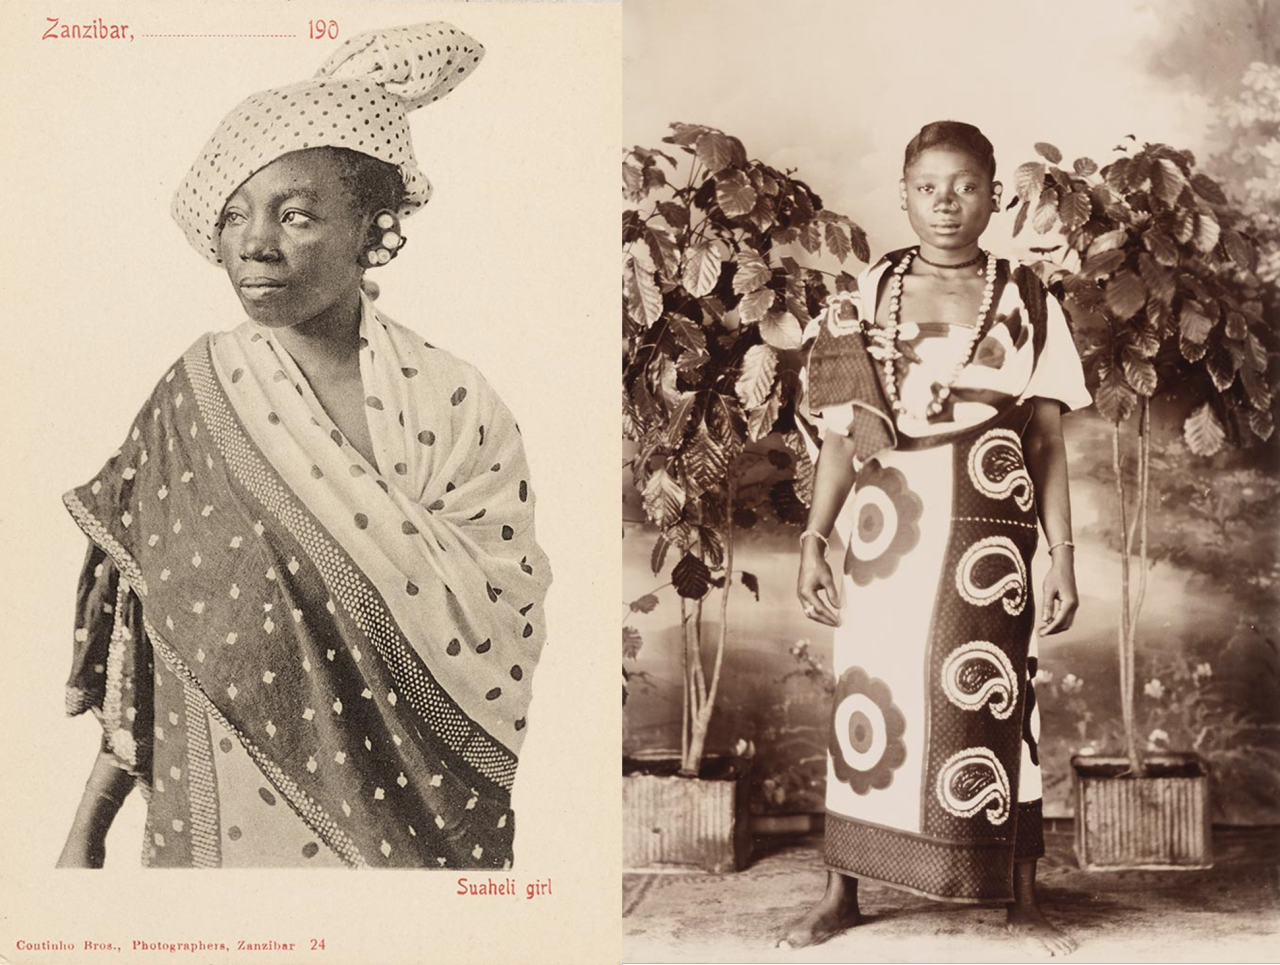 swahiliculture:Sailors and Daughters. Early Photography and the Indian Ocean (the